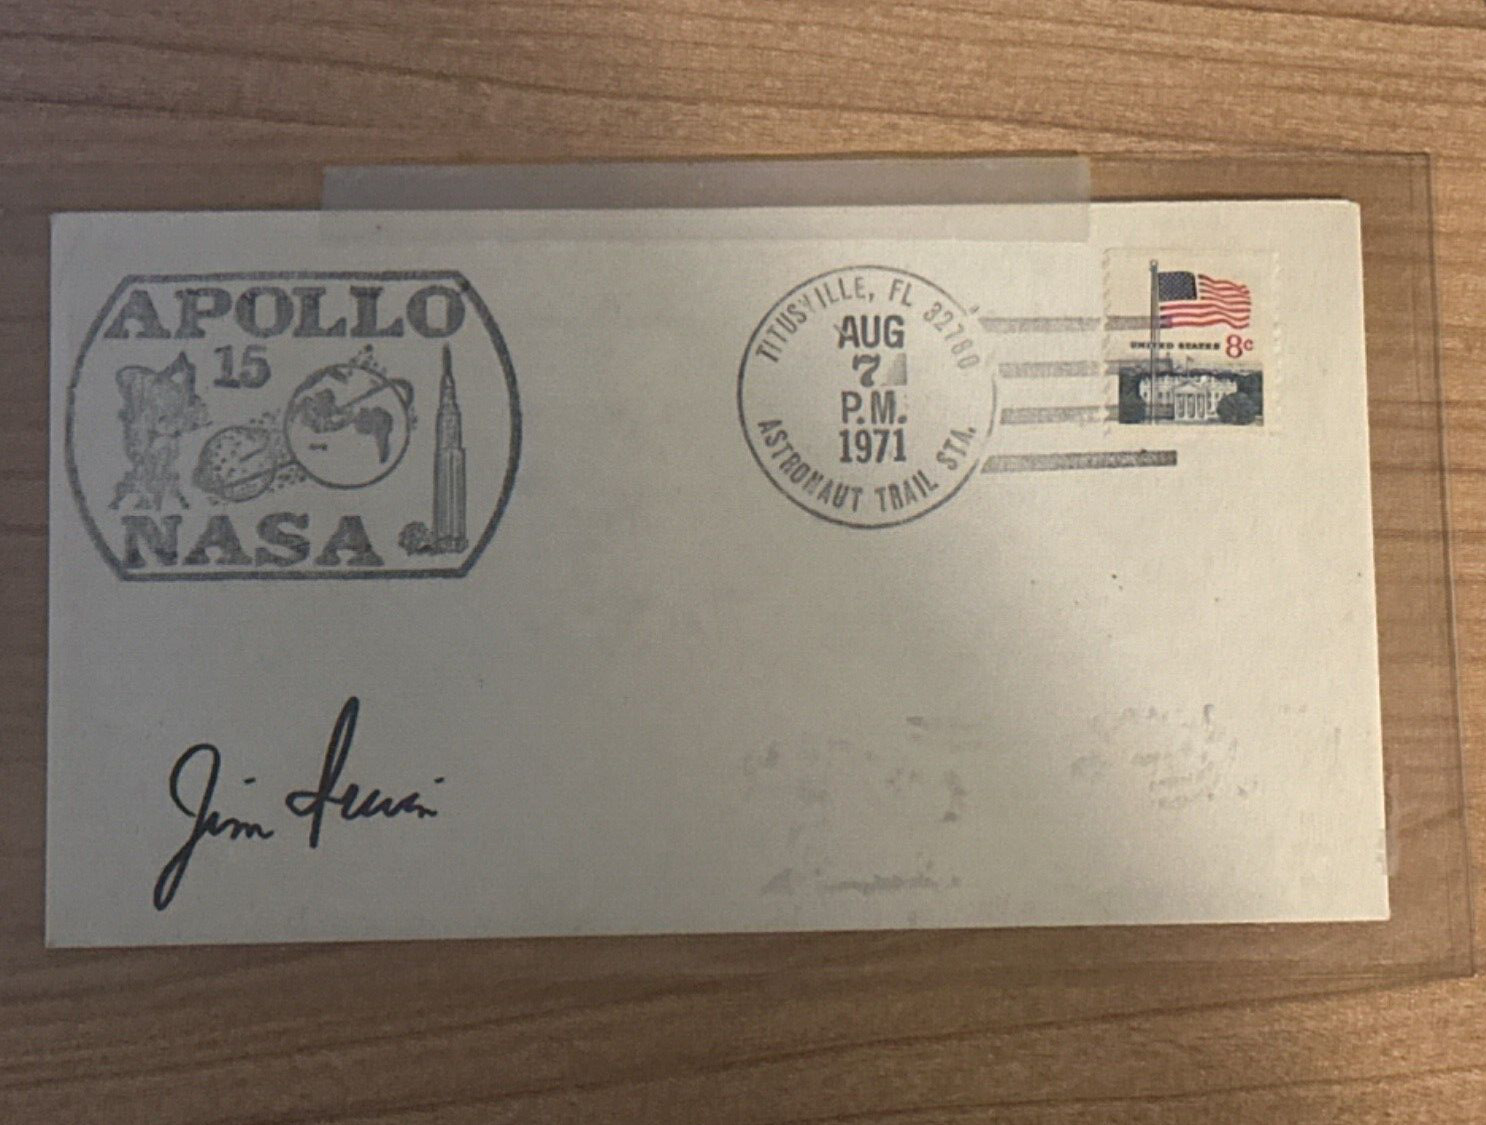 Apollo 15 Astronaut - Jim Irwin Hand Signed - Dated August 1971